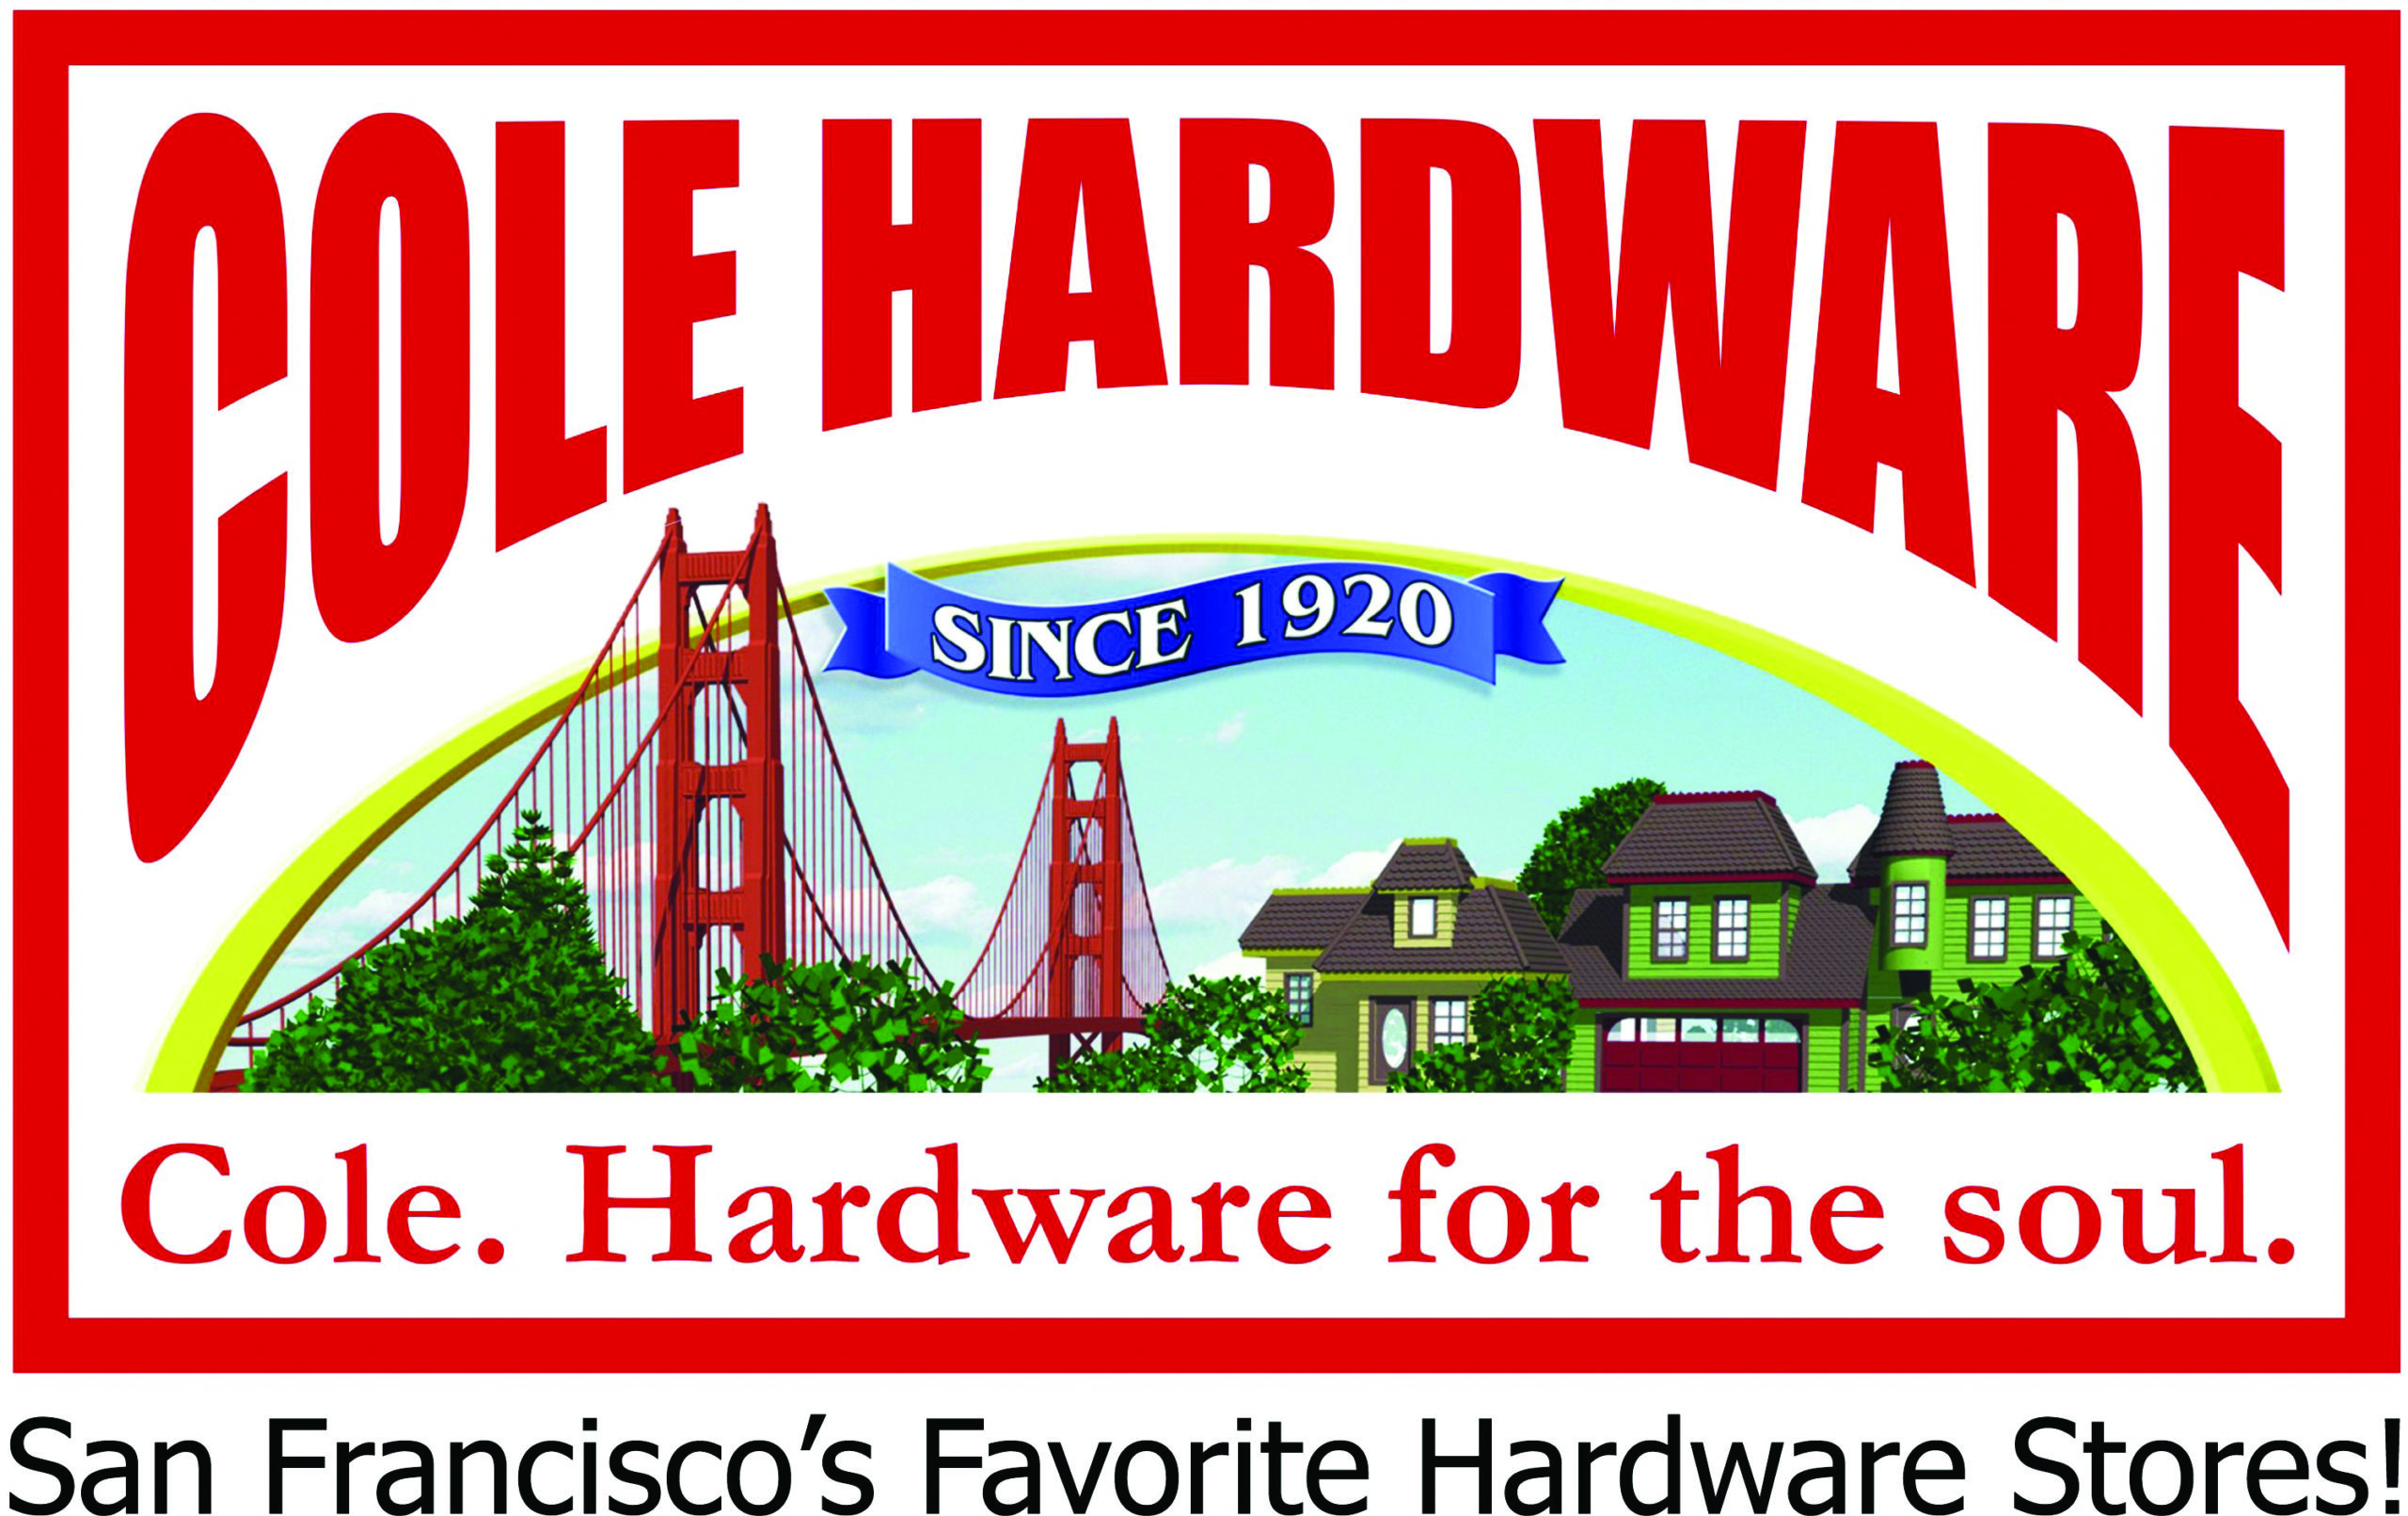 Cole Hardware | Since 1920 | Cole. Hardware for the soul.